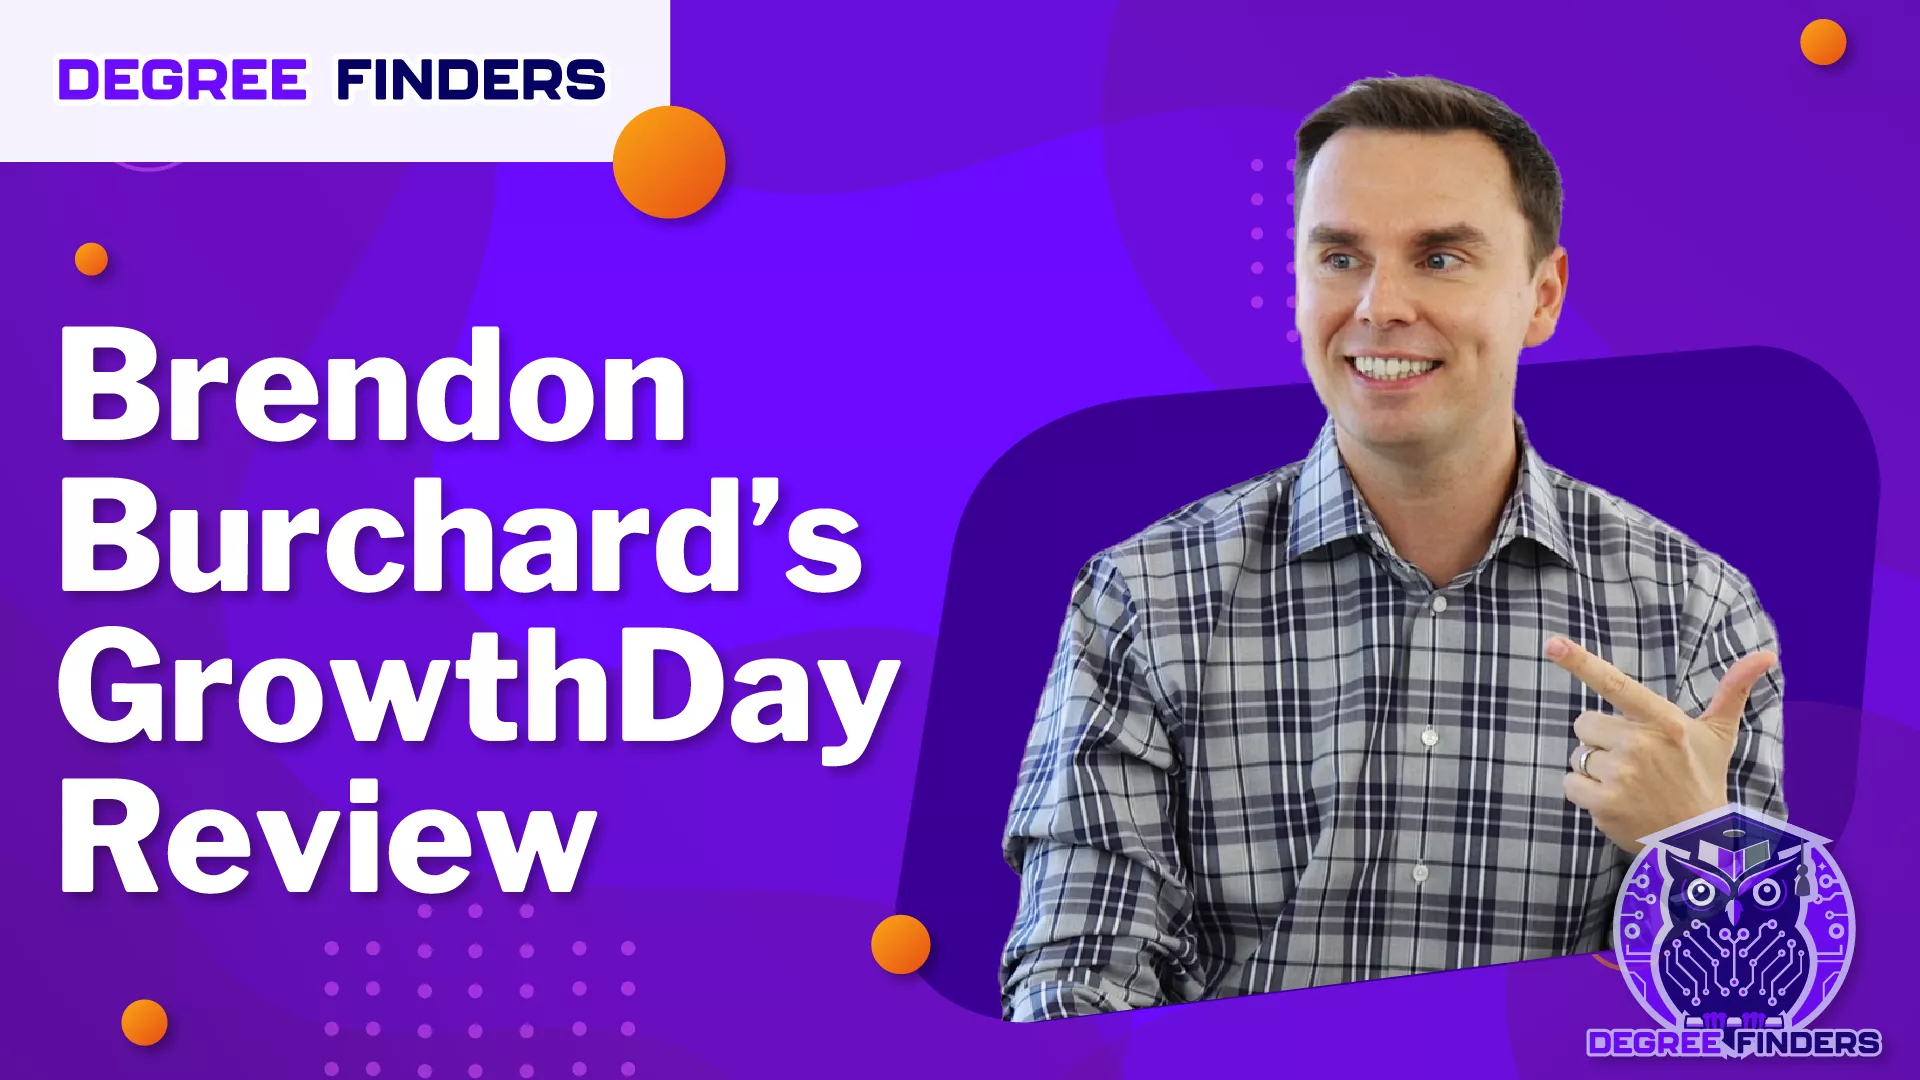 Brendon Burchard’s GrowthDay Review